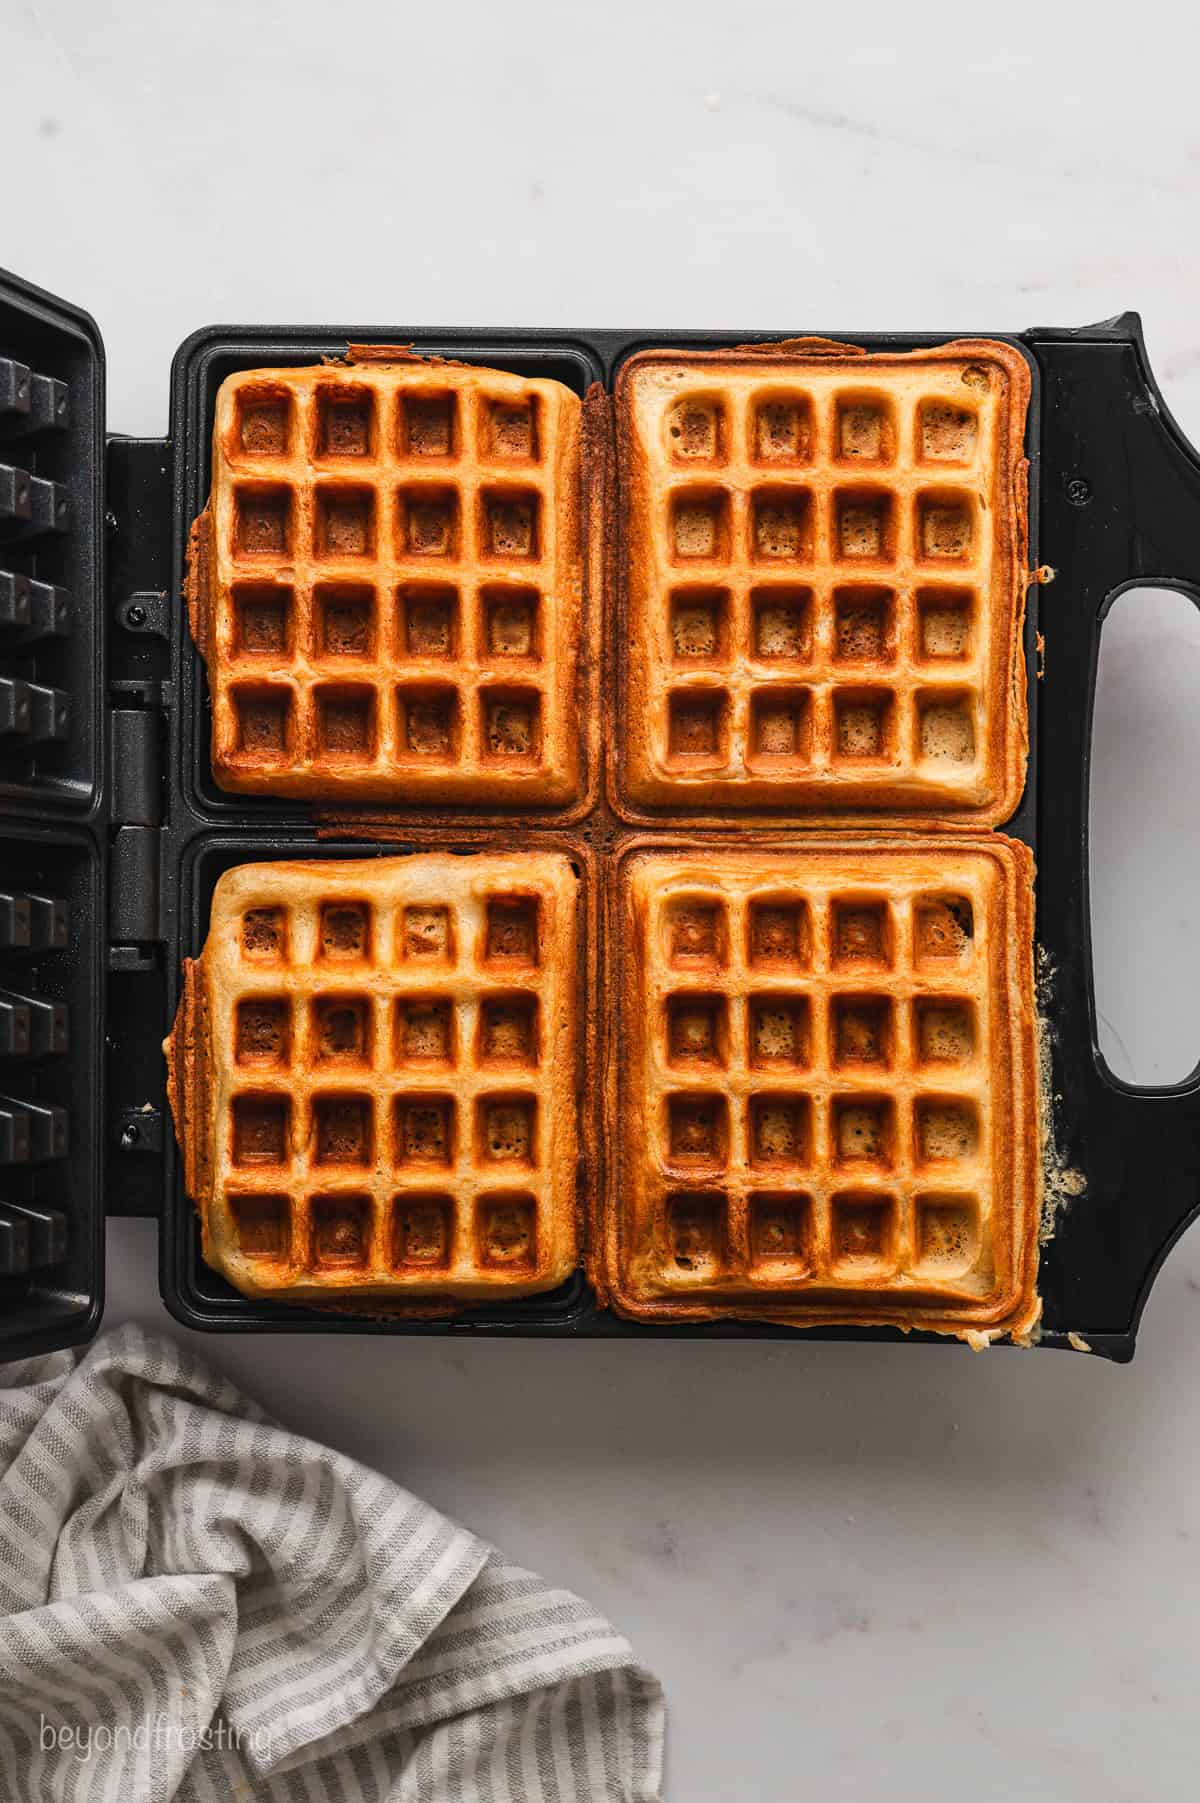 Four cooked waffles inside a waffle iron.